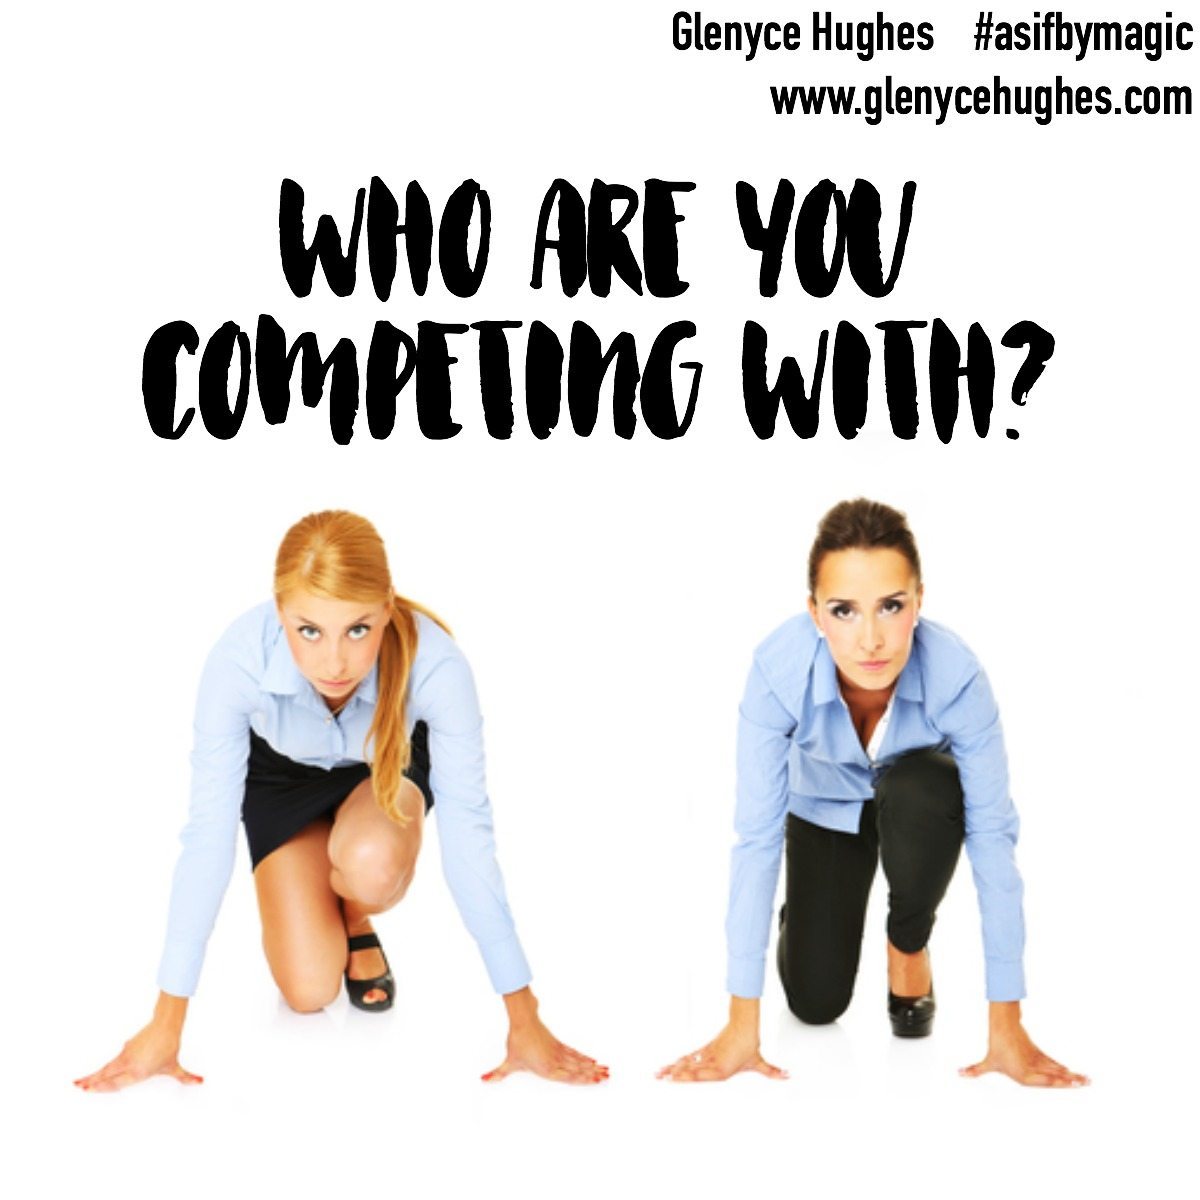 Who Are You Competing With?